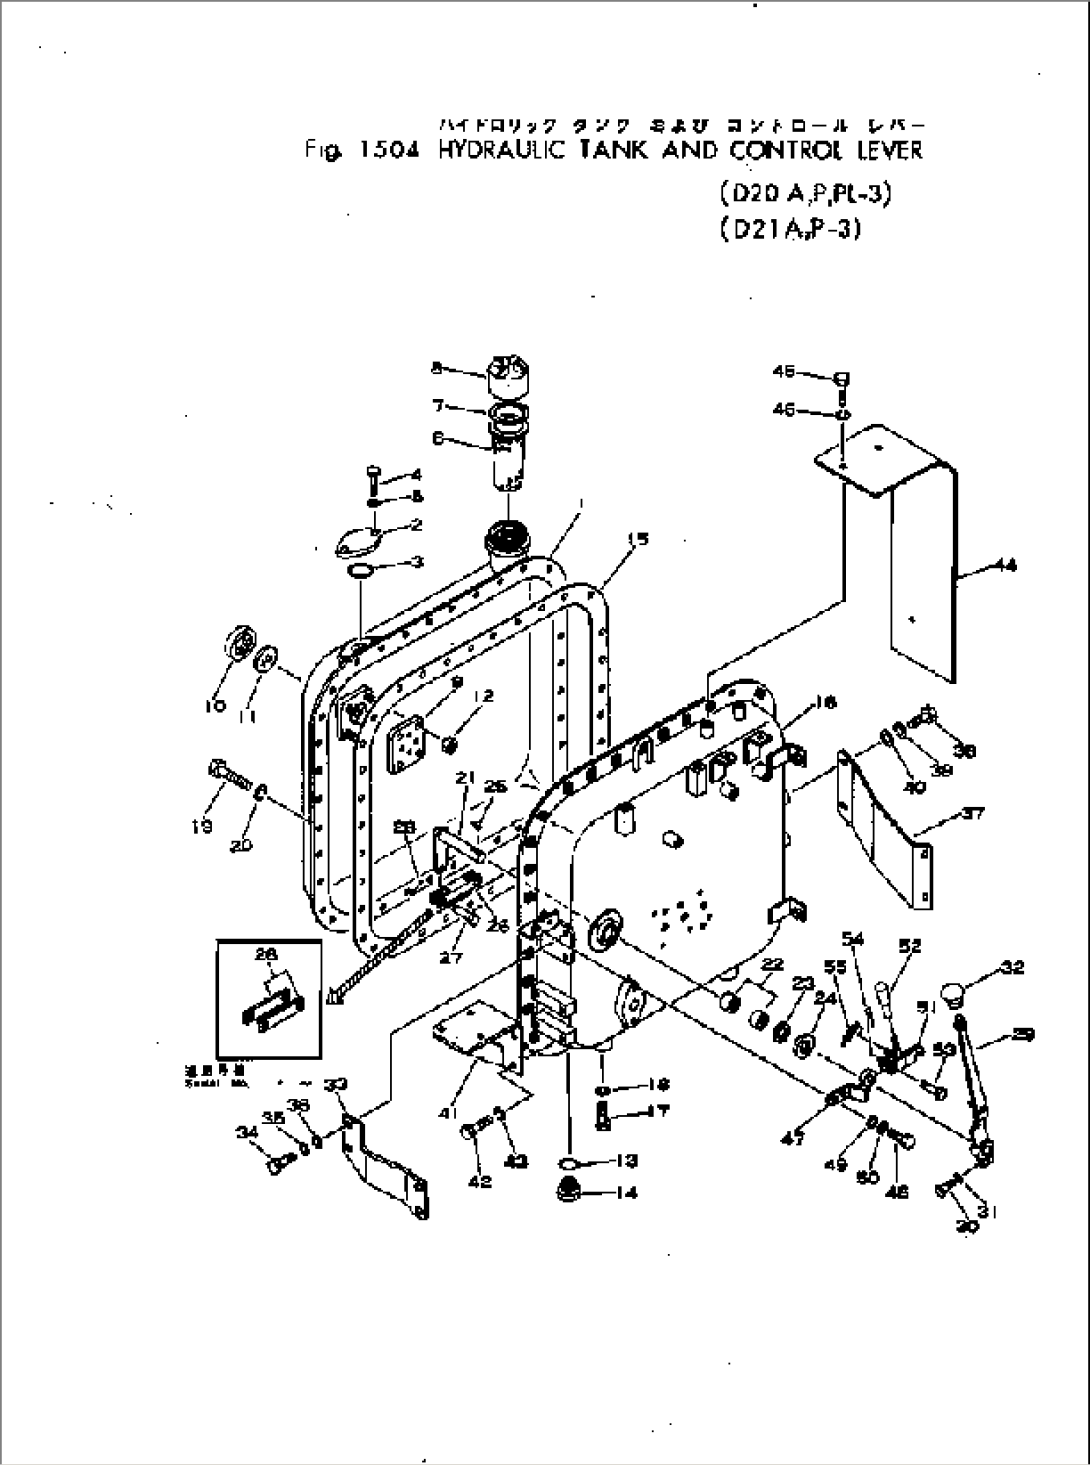 HYDRAULIC TANK AND CONTROL LEVER